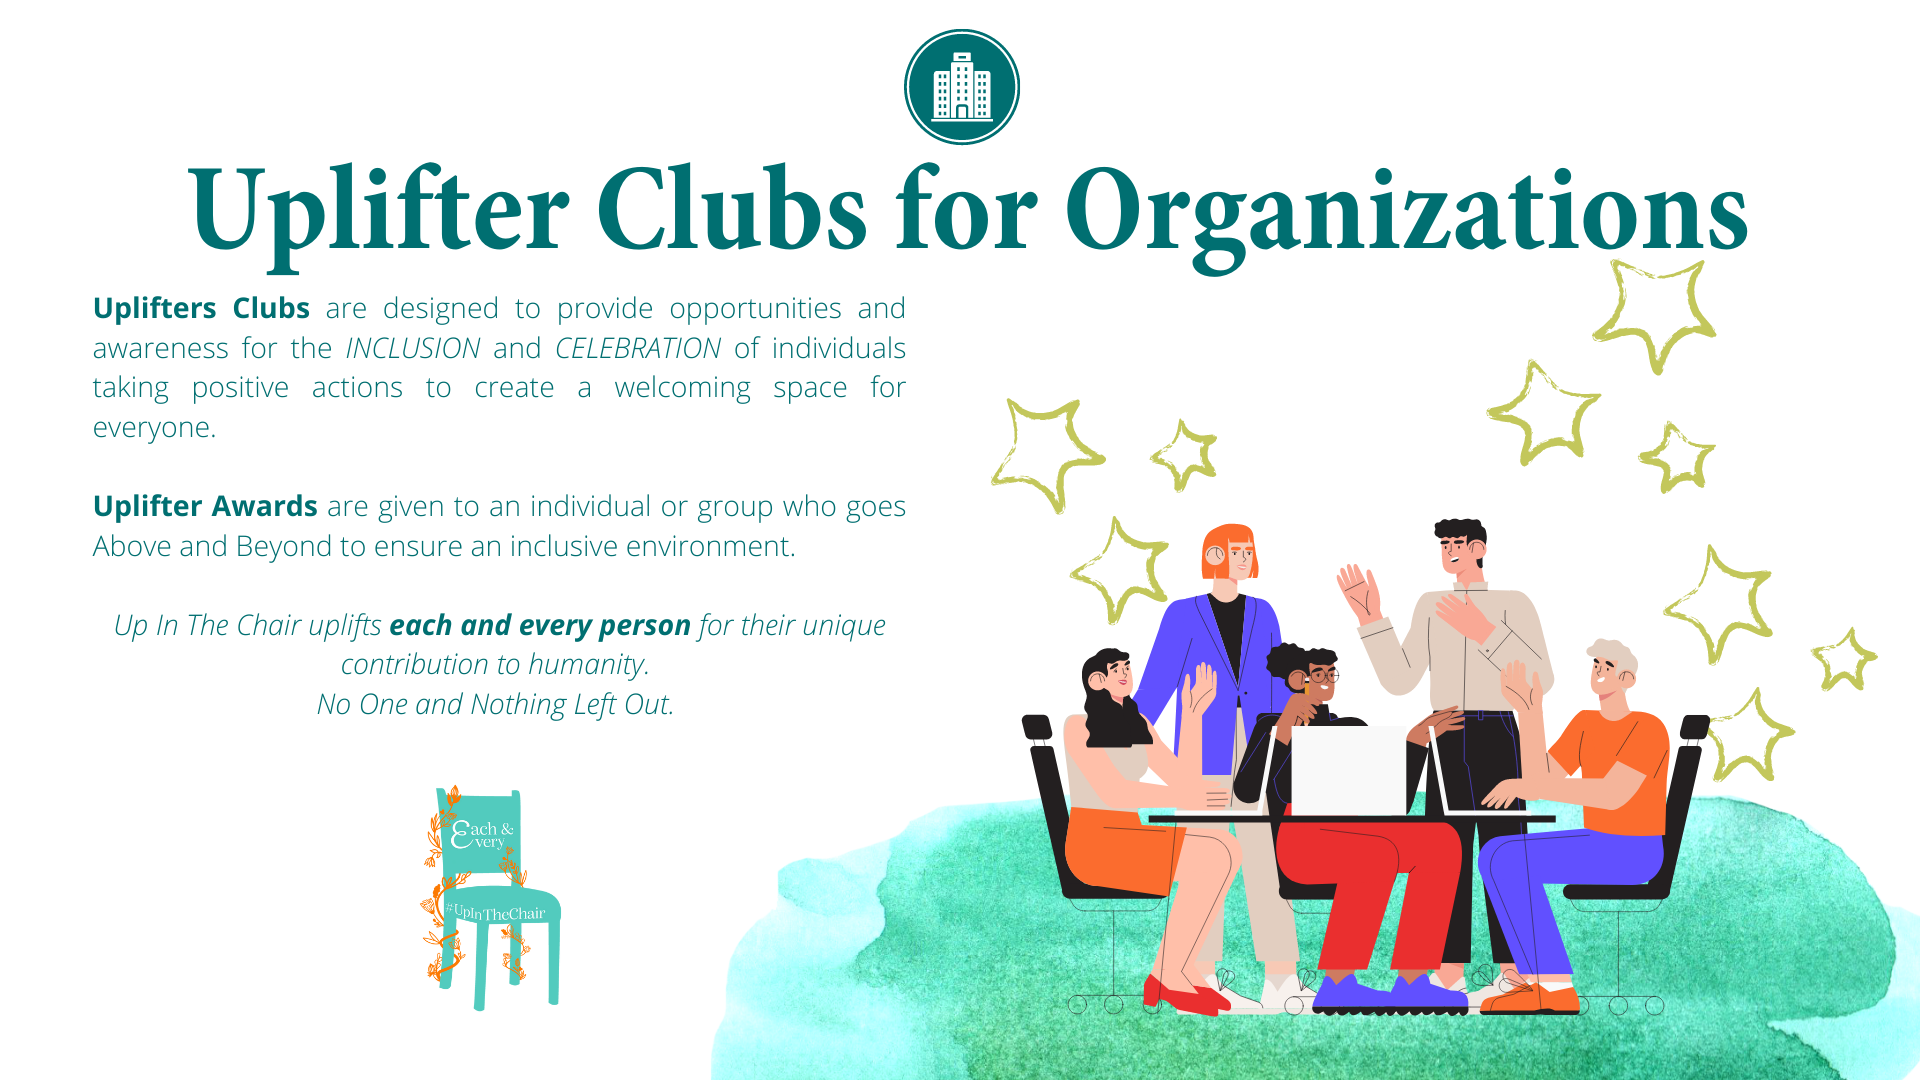 Uplifters Clubs for Organizations are designed to provide opportunities and awareness for the inclusion and celebration of individuals taking positive actions to create a welcoming space for everyone. Uplifter Awards are given to an individual or group who goes Above and Beyond to ensure an inclusive environment. Up In The Chair uplifts each and every person for their unique contribution to humanity. No One and Nothing Left Out.